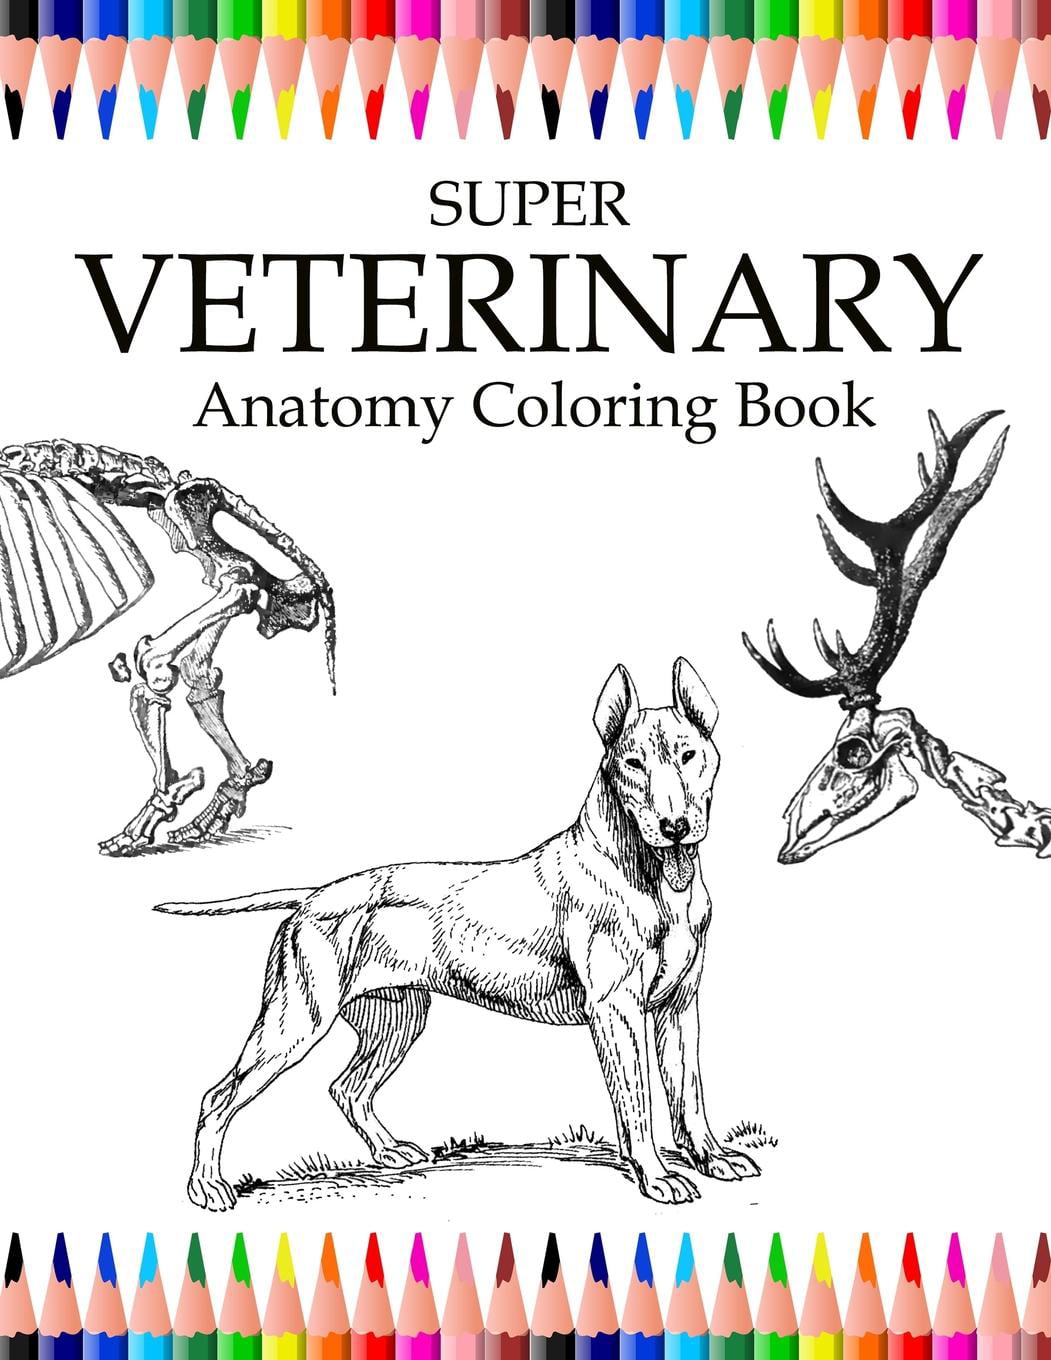 Super Veterinary Anatomy Coloring Book  Animals for Relax, Large 20.20x20 to  Color, Design for Students